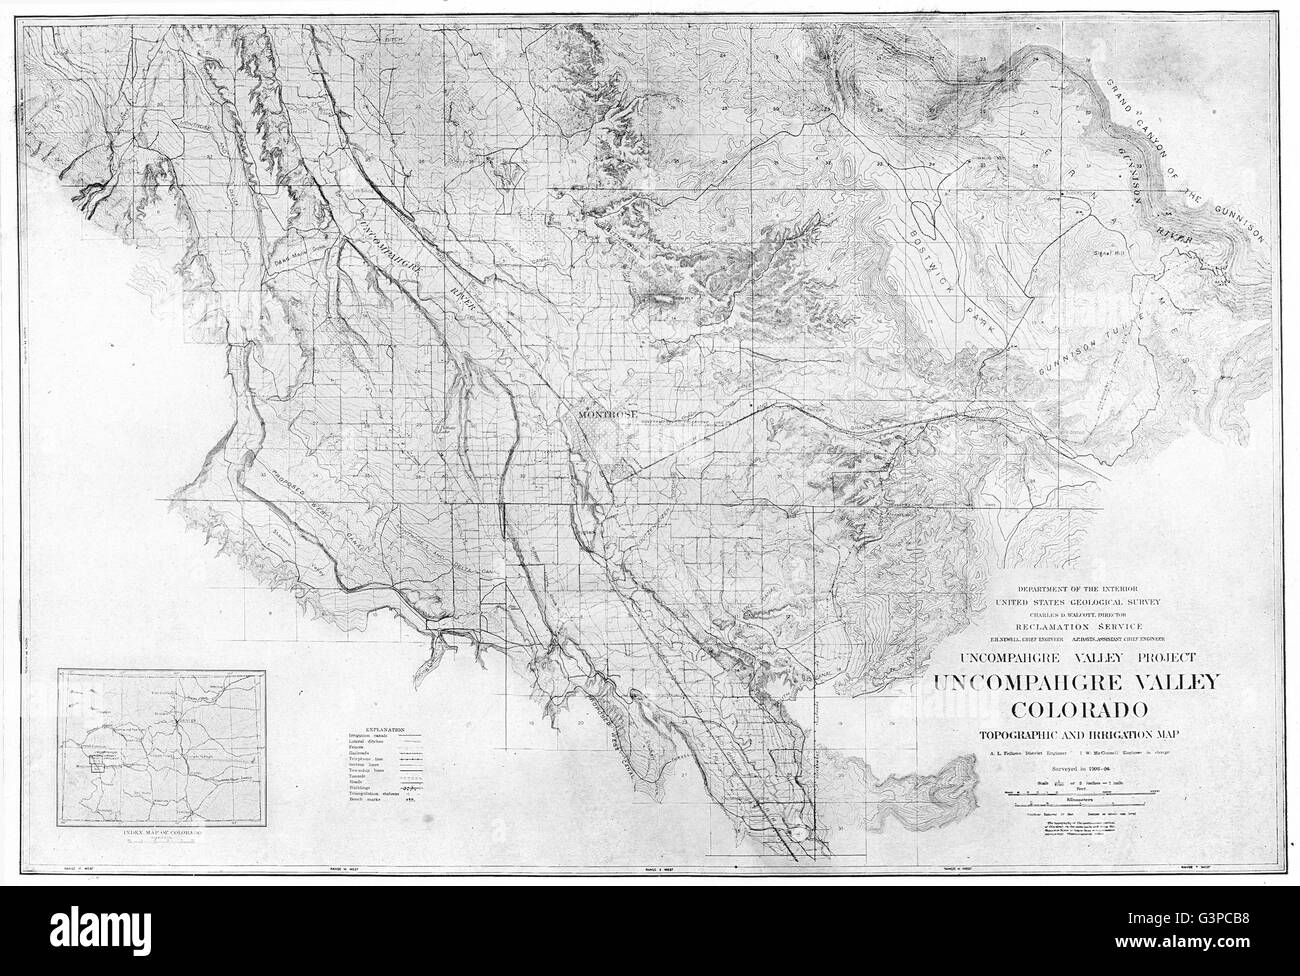 Uncompahgre Valley Colorado Topographic and Irrigation Map, 1907 Stock Photo